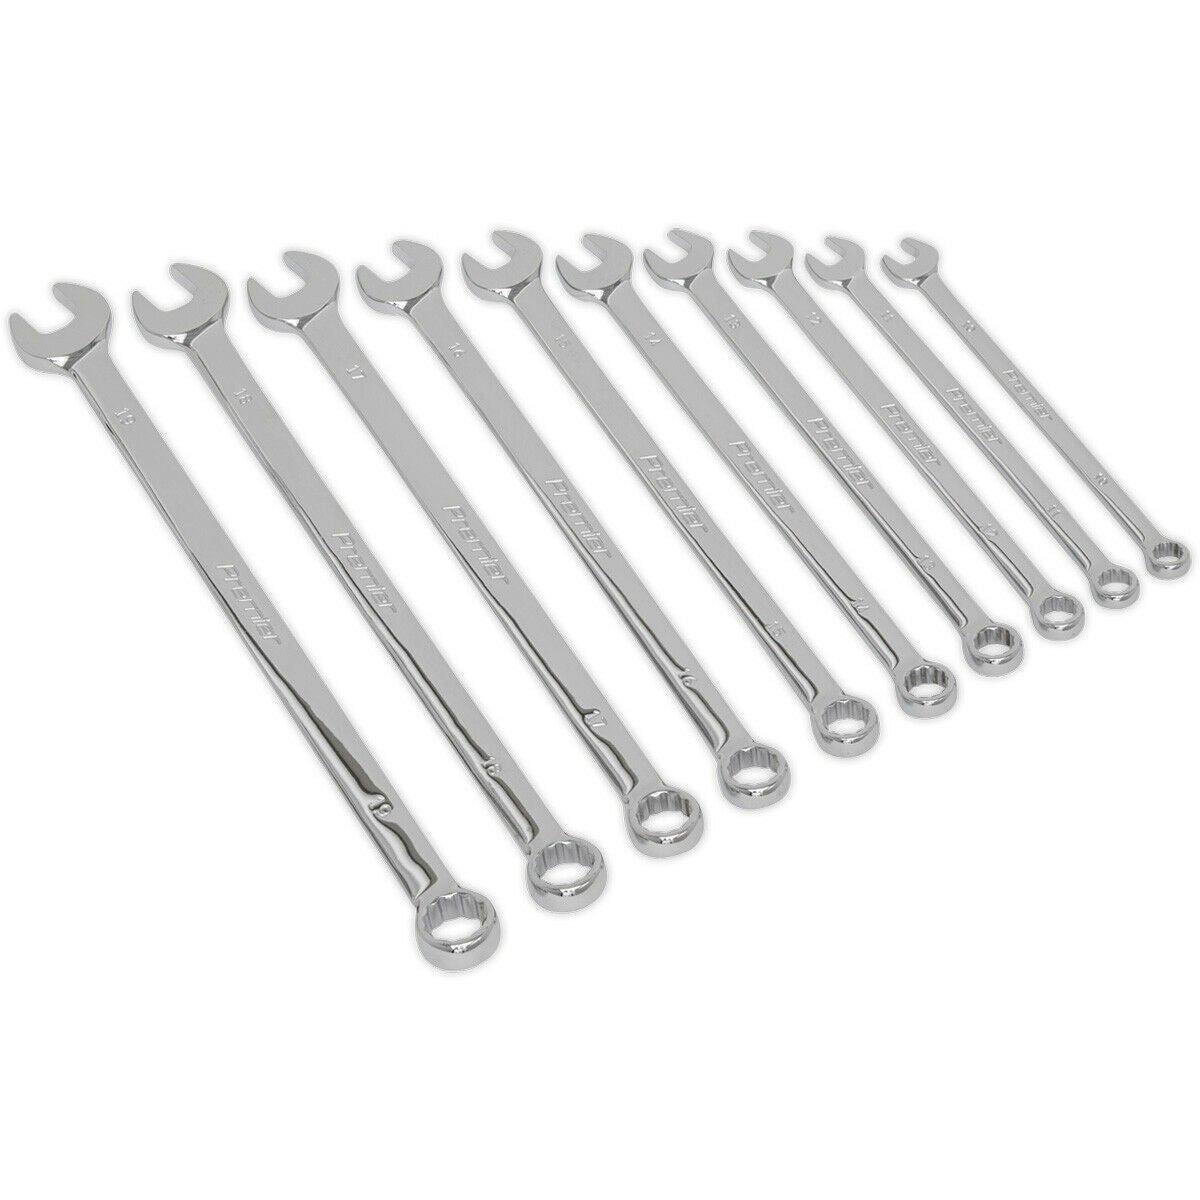 10pc Extra Long Combination Hand Spanner Set - 10 to 19mm Metric 12 Point Socket